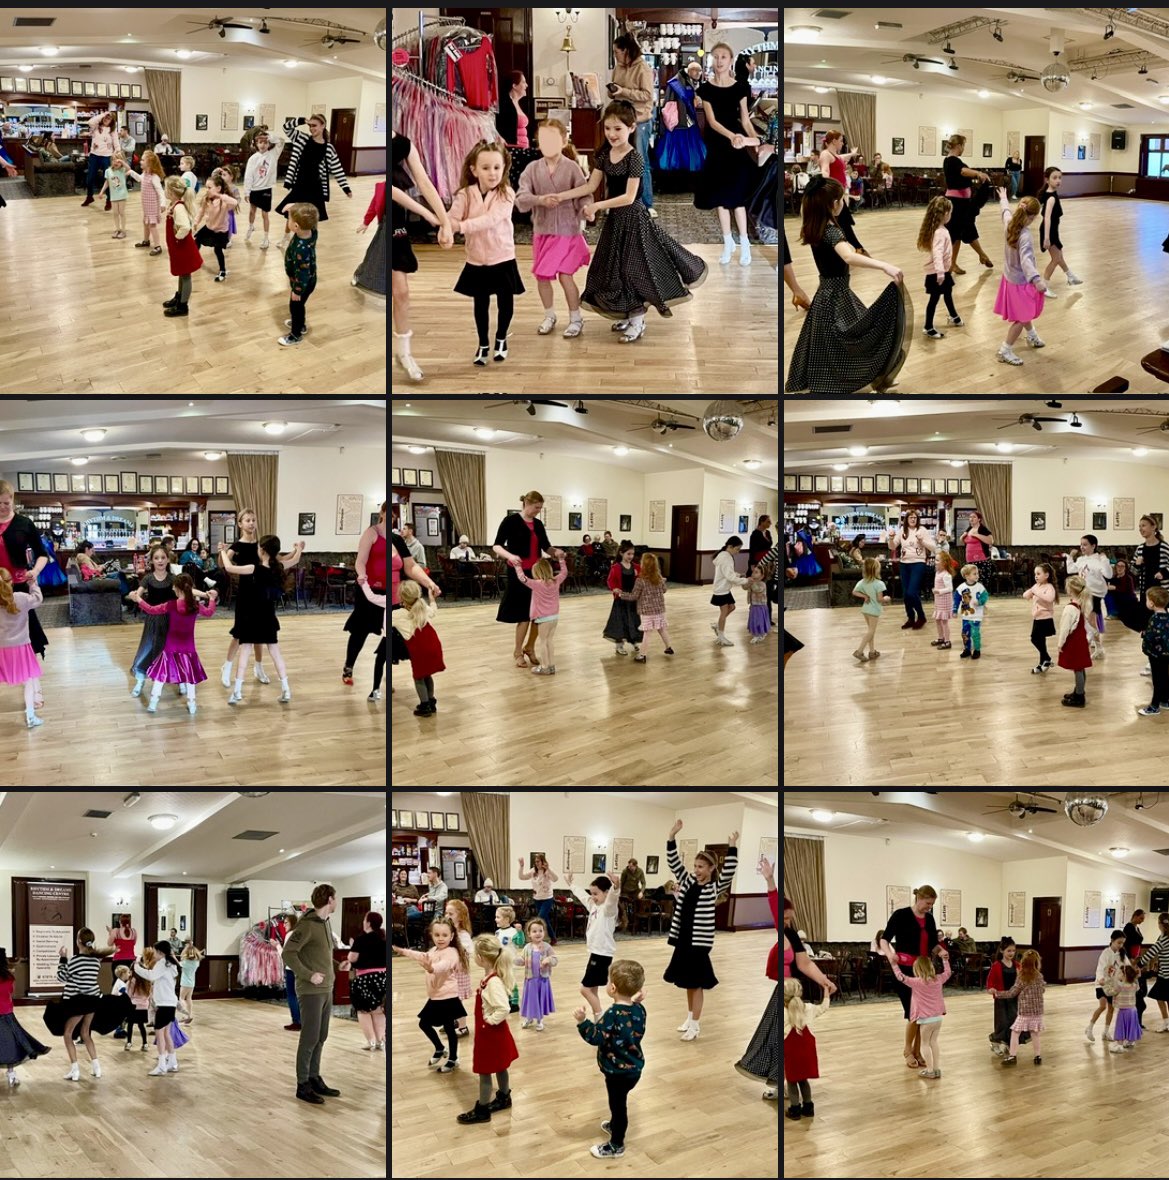 What a great start to our 2024 Saturday classes 💃🏻🕺🏽
Fun, fun, fun!! And kids learn best when they’re having fun 😃
#SaturdayClasses #KidsClasses #ClassesForChildren #DanceLessonsHull #DanceClassesHull #DanceSchoolHull #RhythmAndDreams